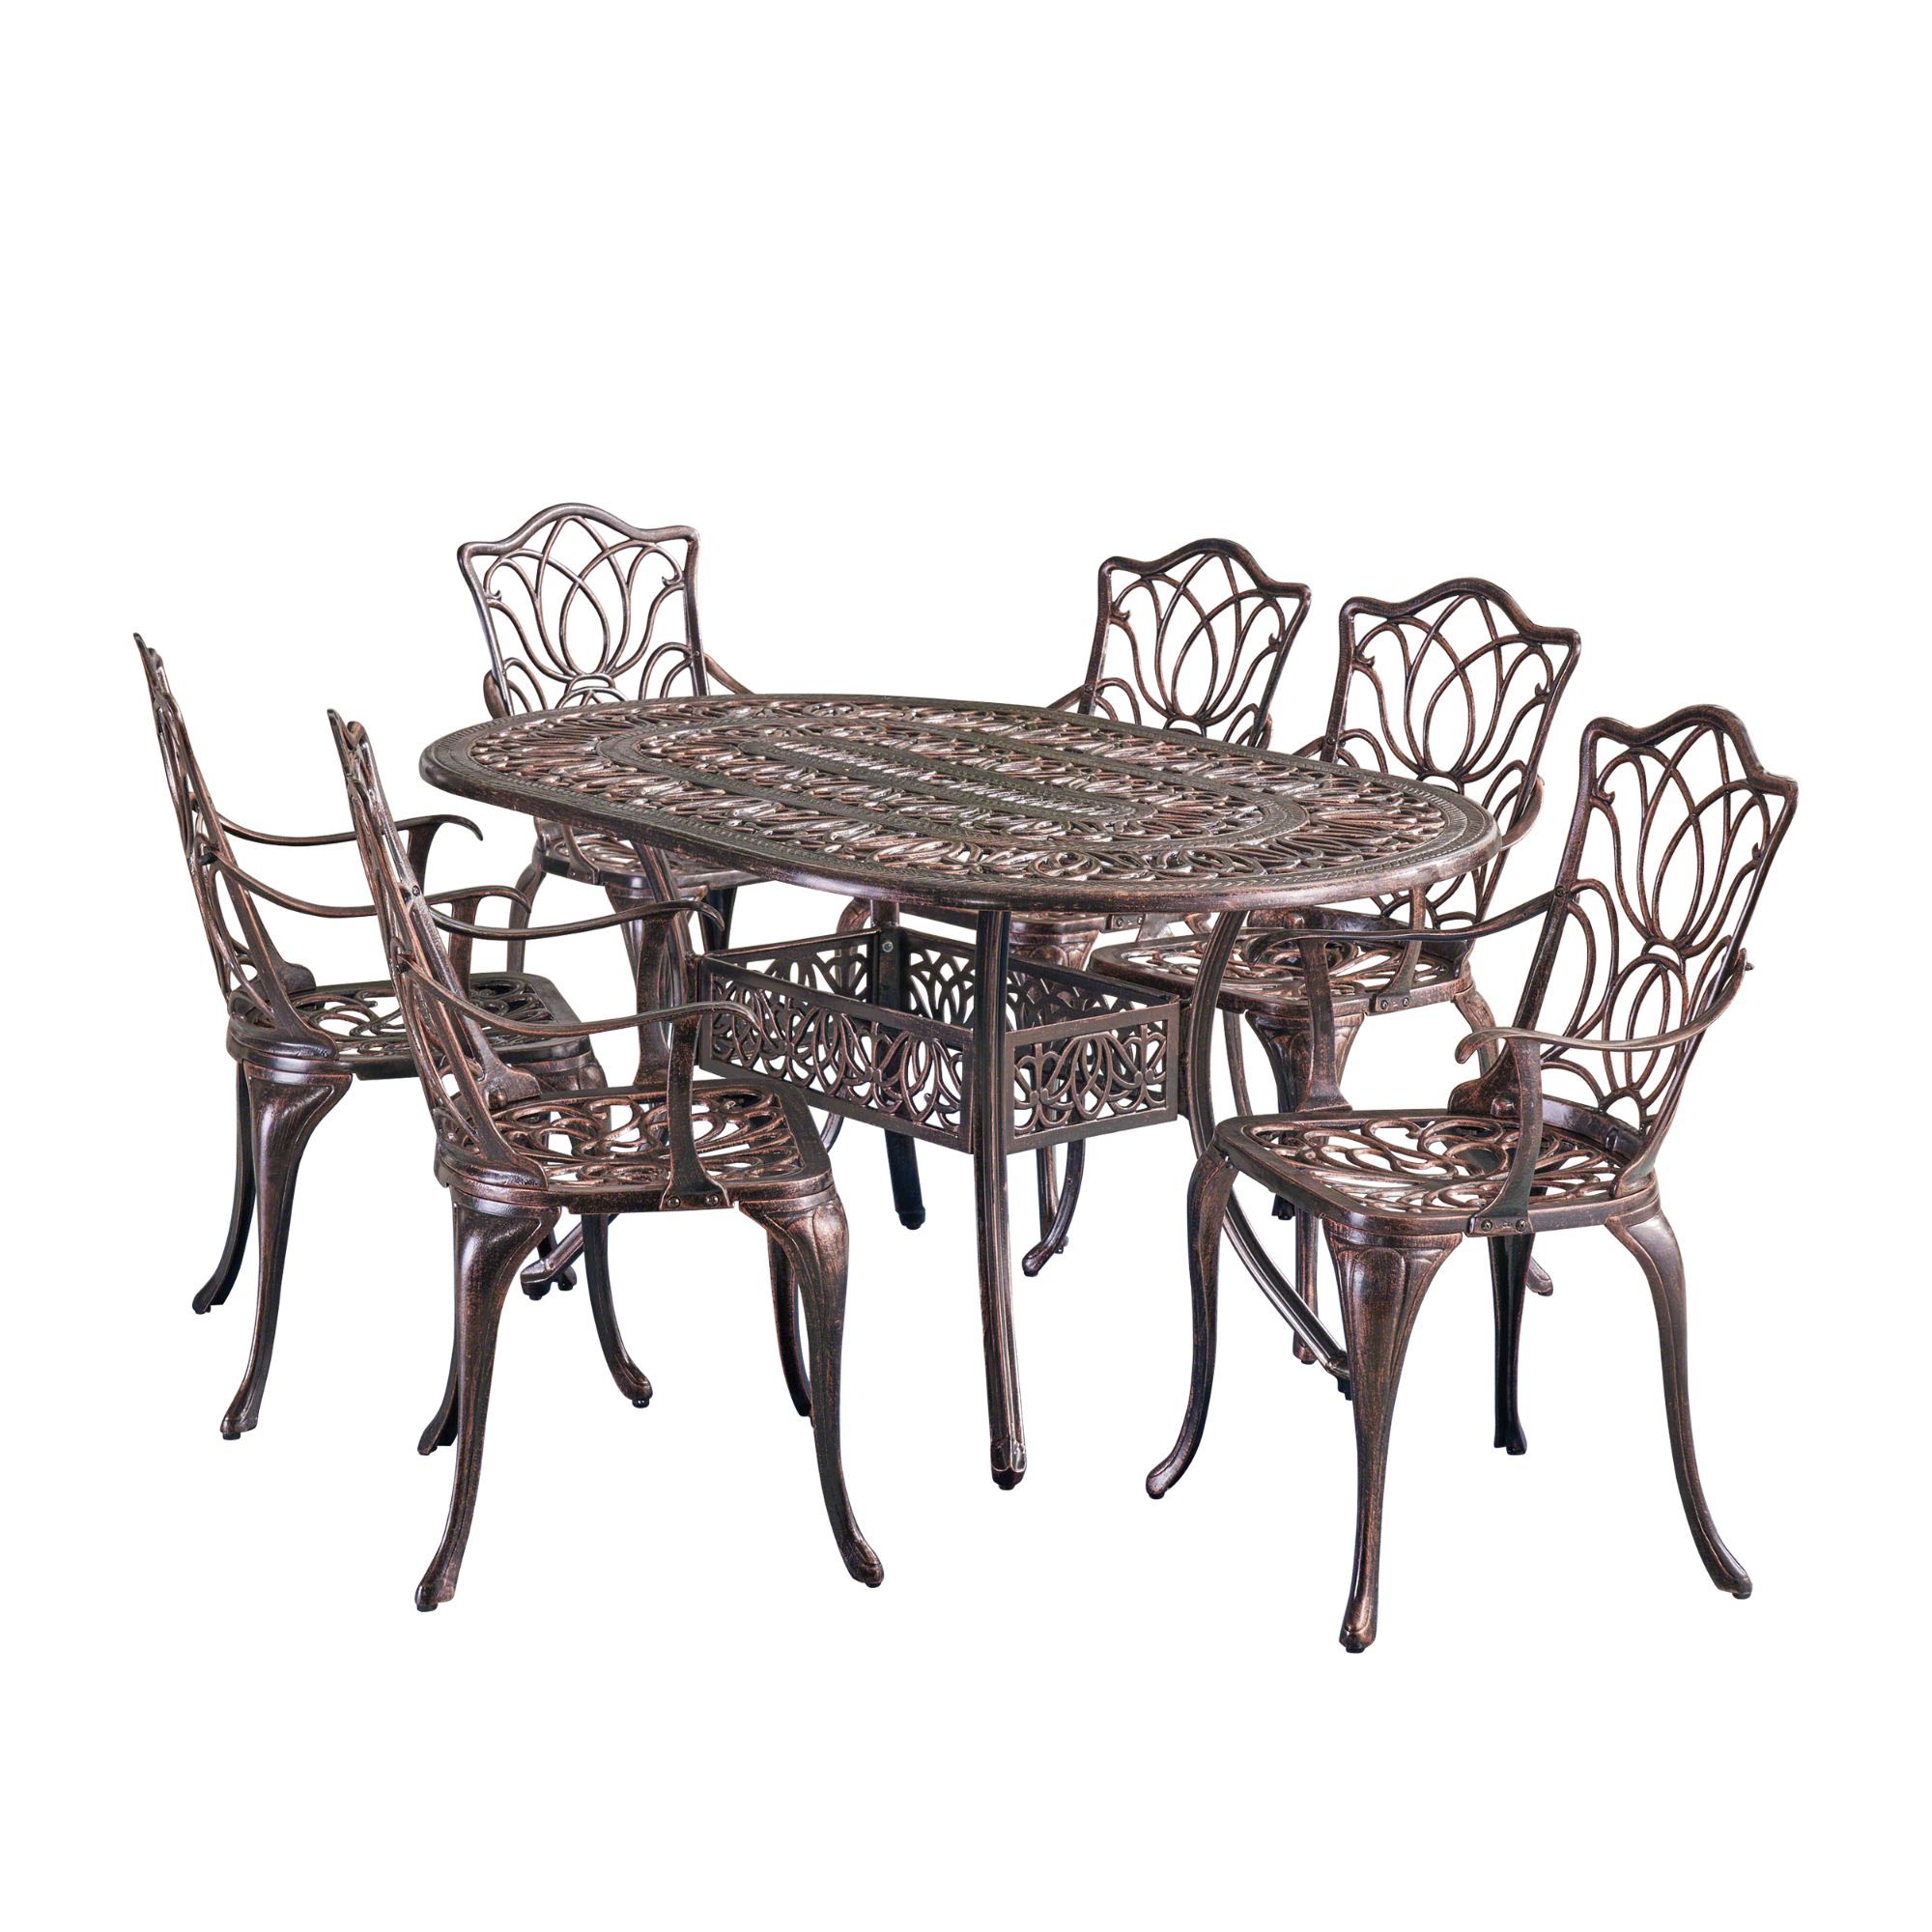 7 Piece Black Contemporary Outdoor Furniture Patio Dining Set 59 Throughout Most Recent Black Outdoor Modern Chairs Sets (View 10 of 15)